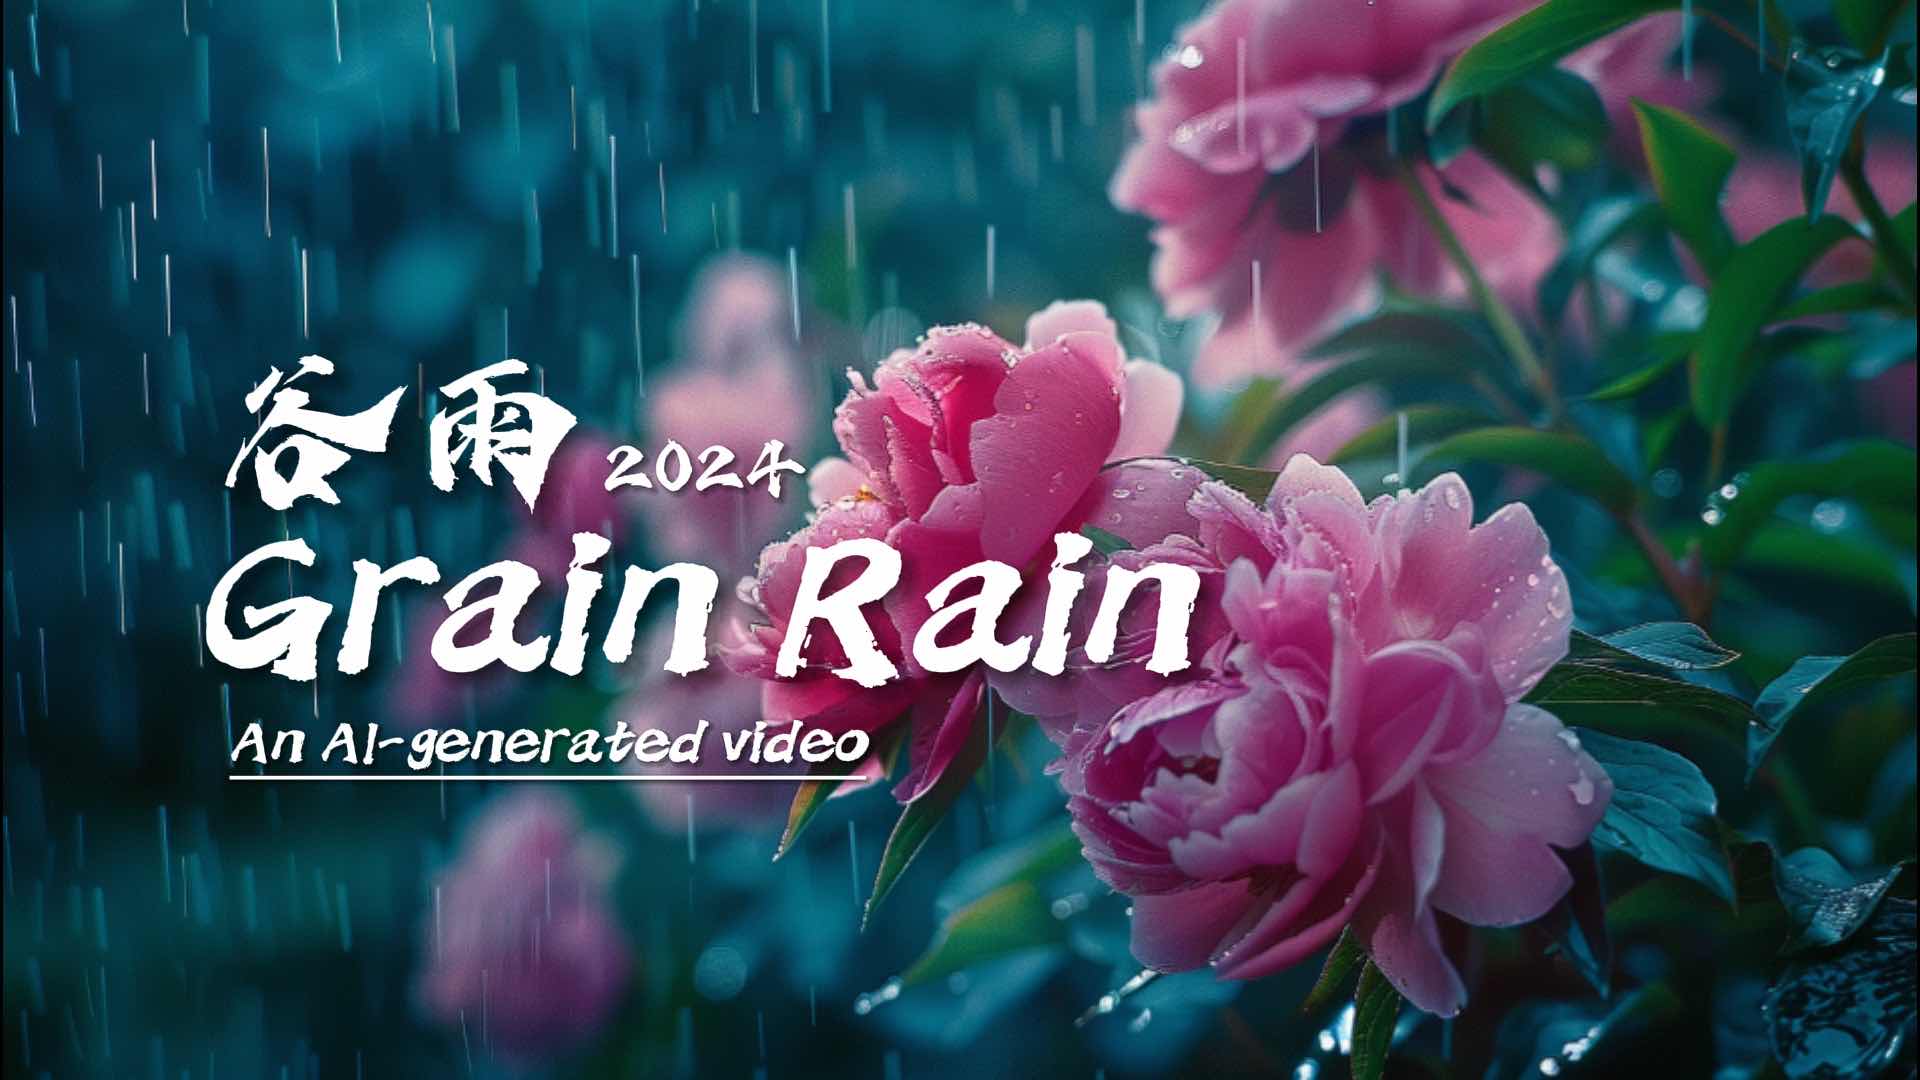 AI-generated video explains time-honored traditions of Grain Rain